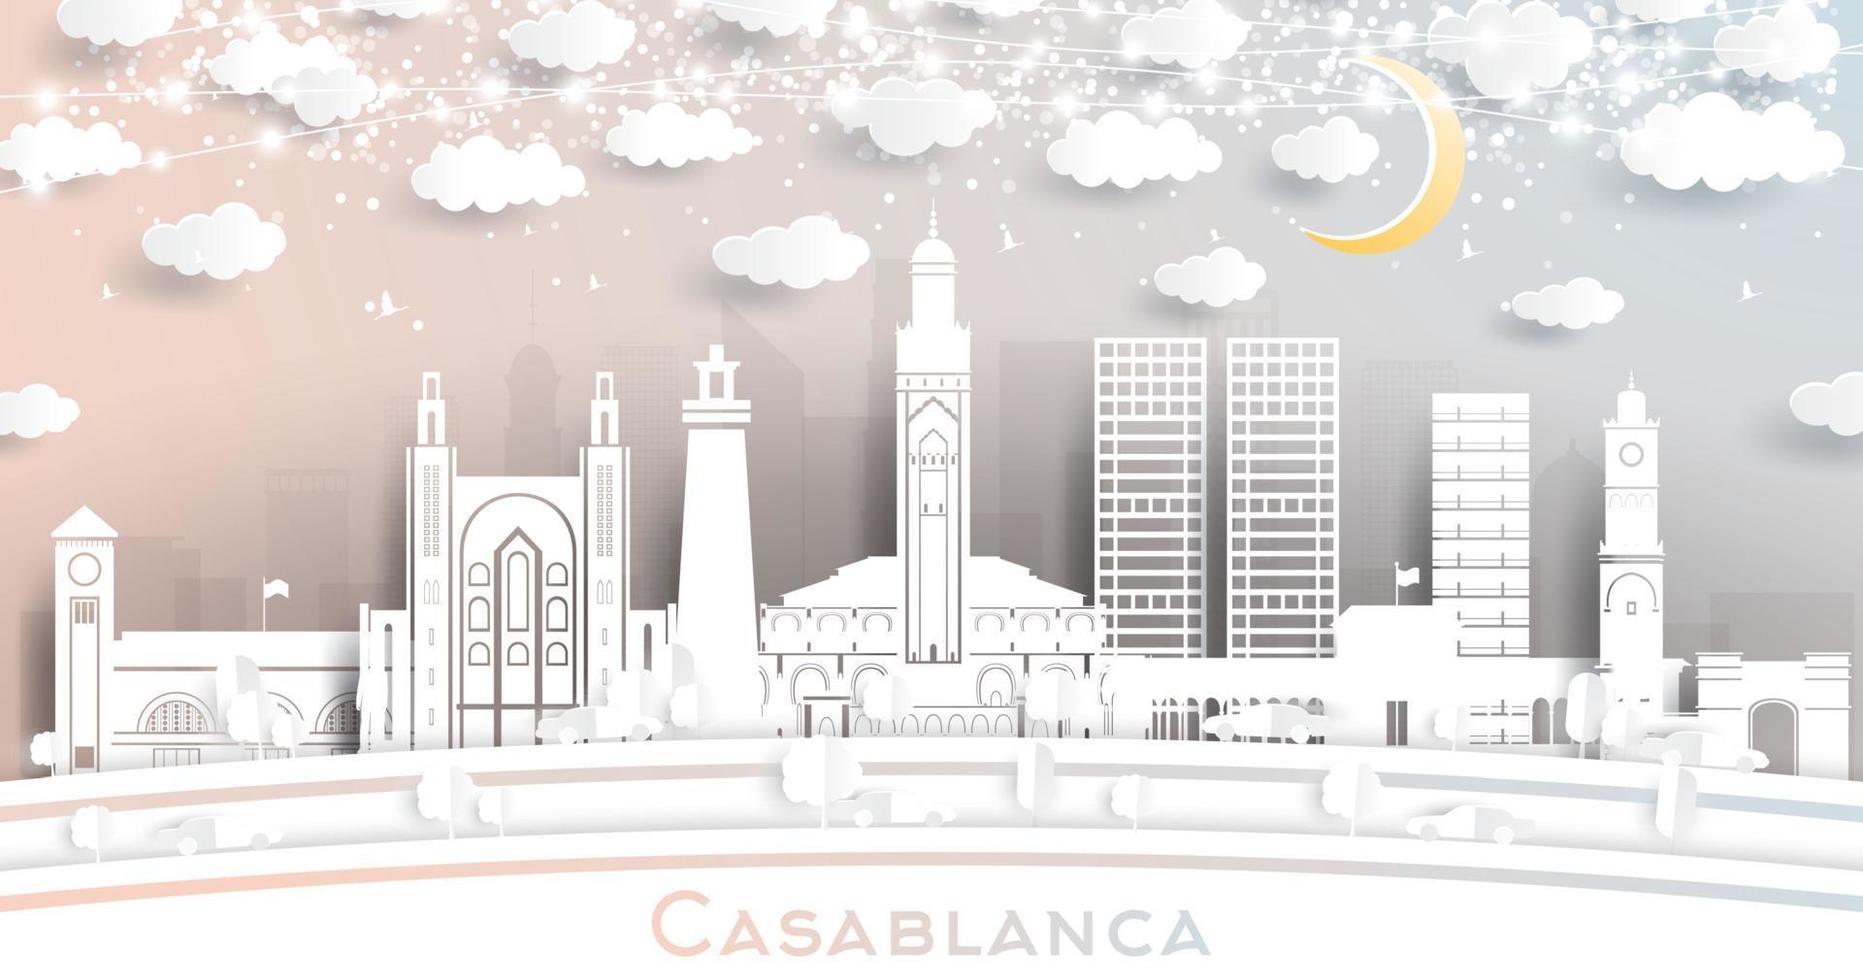 Casablanca Morocco City Skyline in Paper Cut Style with White Buildings, Moon and Neon Garland. vector